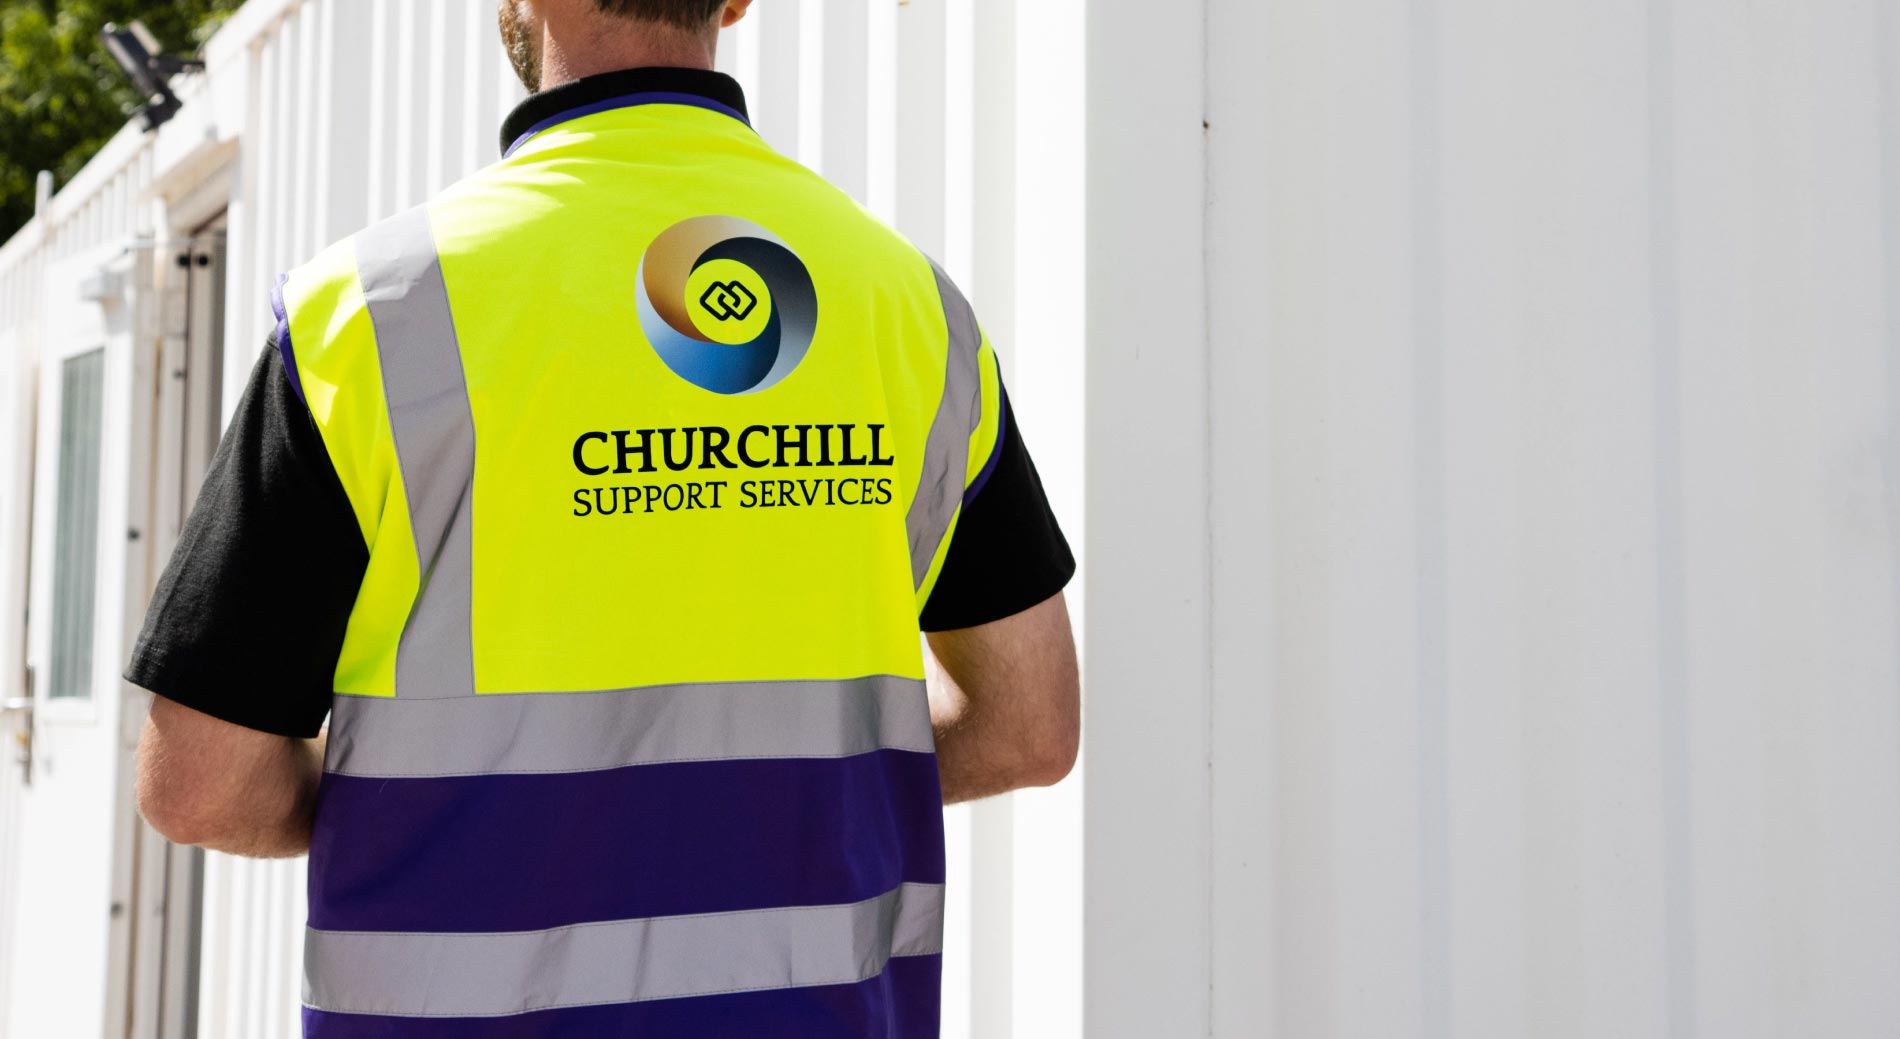 Churchill's security services and operating sectors